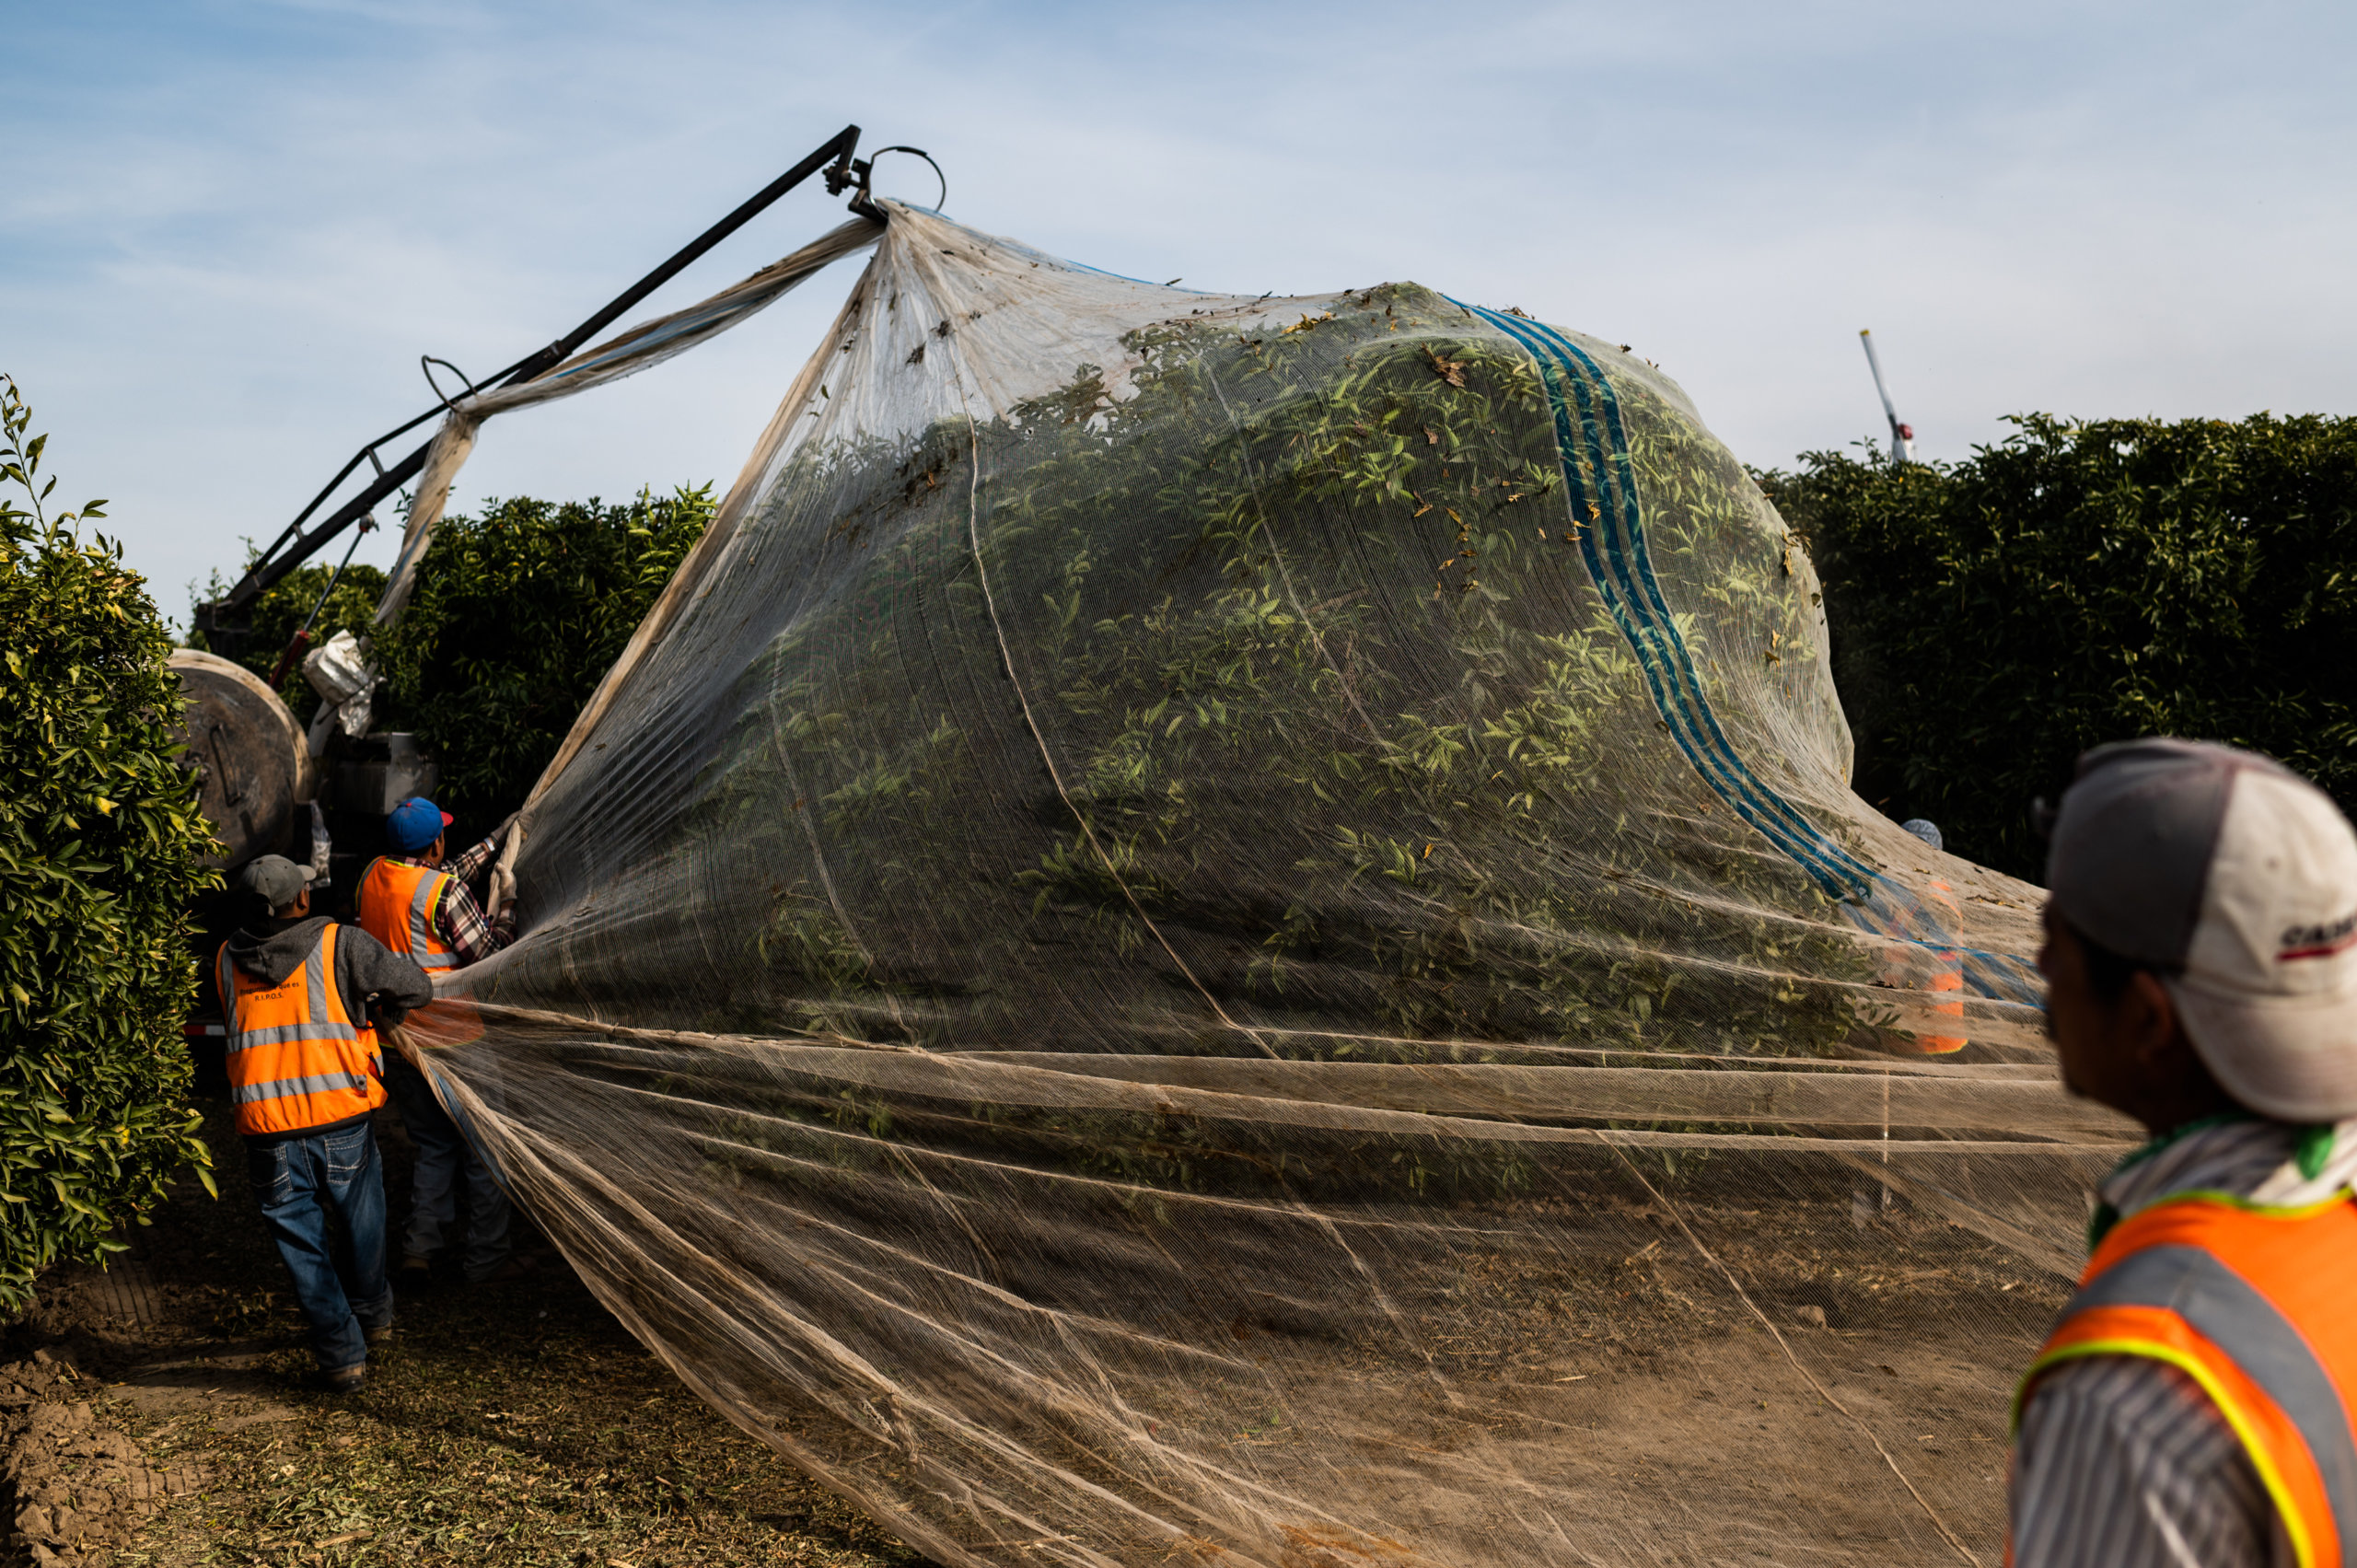 The field crew helps spread the nets that will keep fruit from pollinating